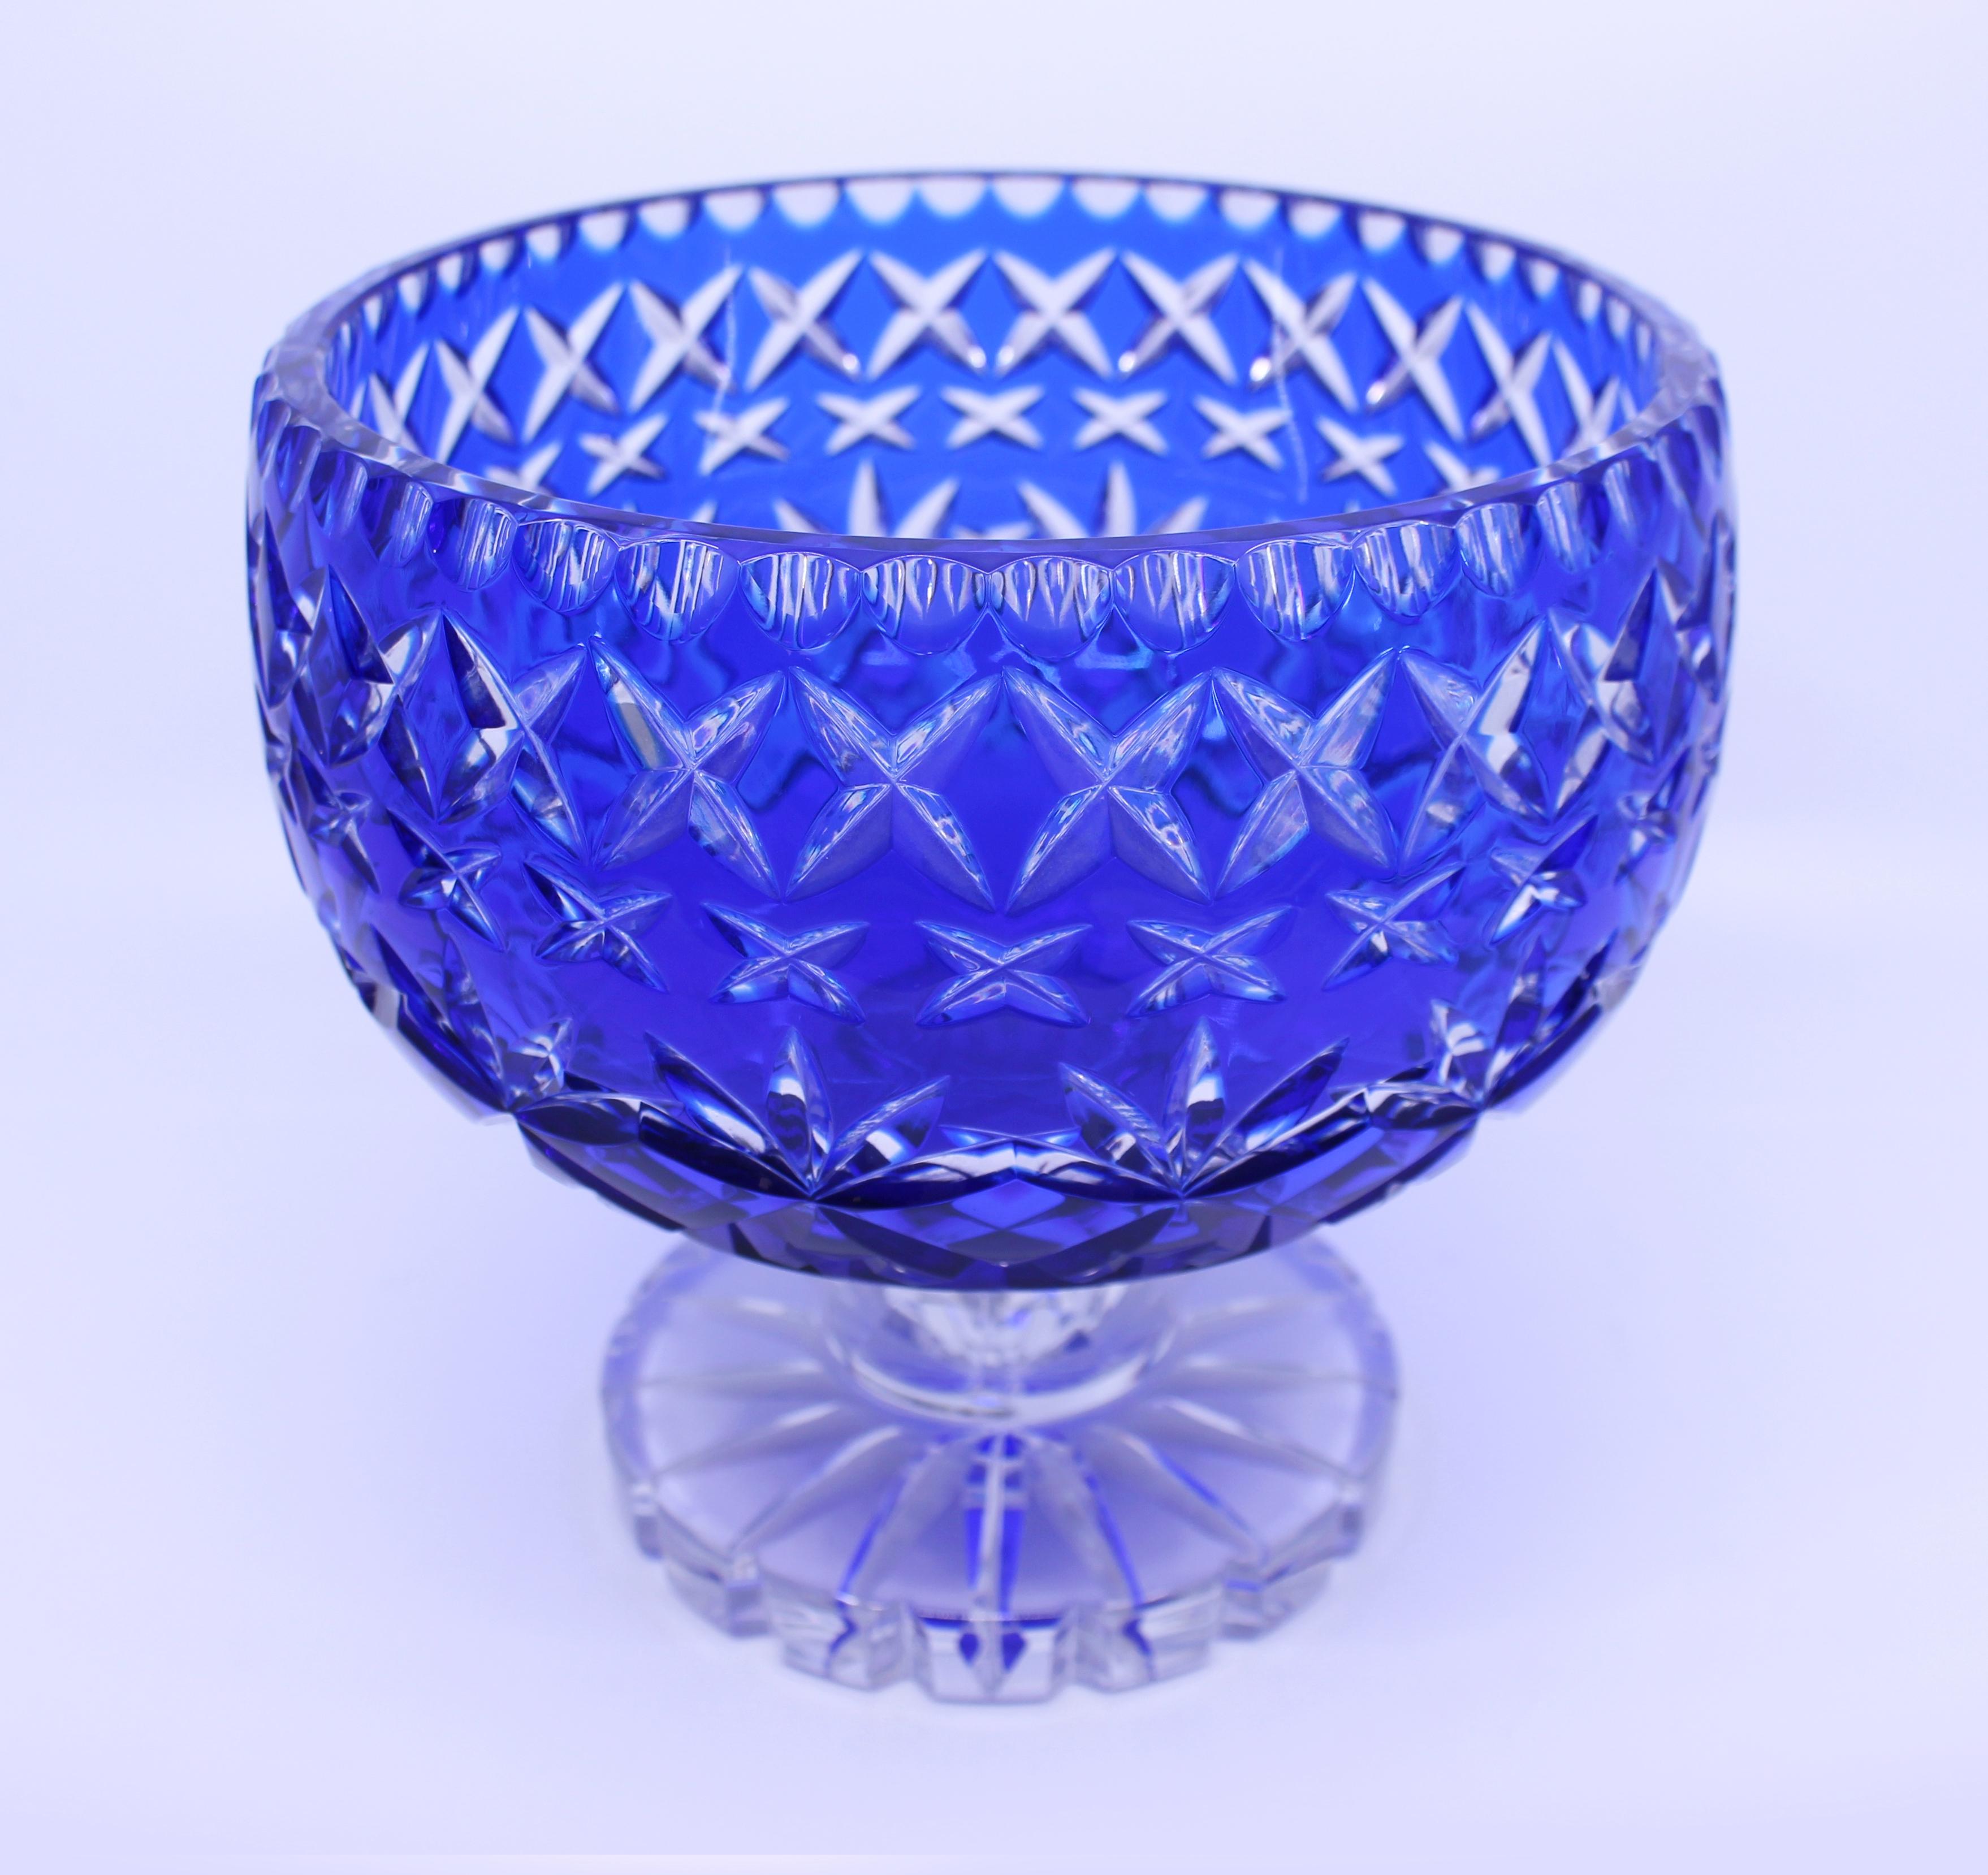 Period 
Mid-20th century.

Origin 
Stourbridge glassworks, England

Composition 
Cut glass overlay crystal, blue

Condition 
Very good condition. No chips, cracks or repairs. A few light scratches to underside commensurate with age
 

